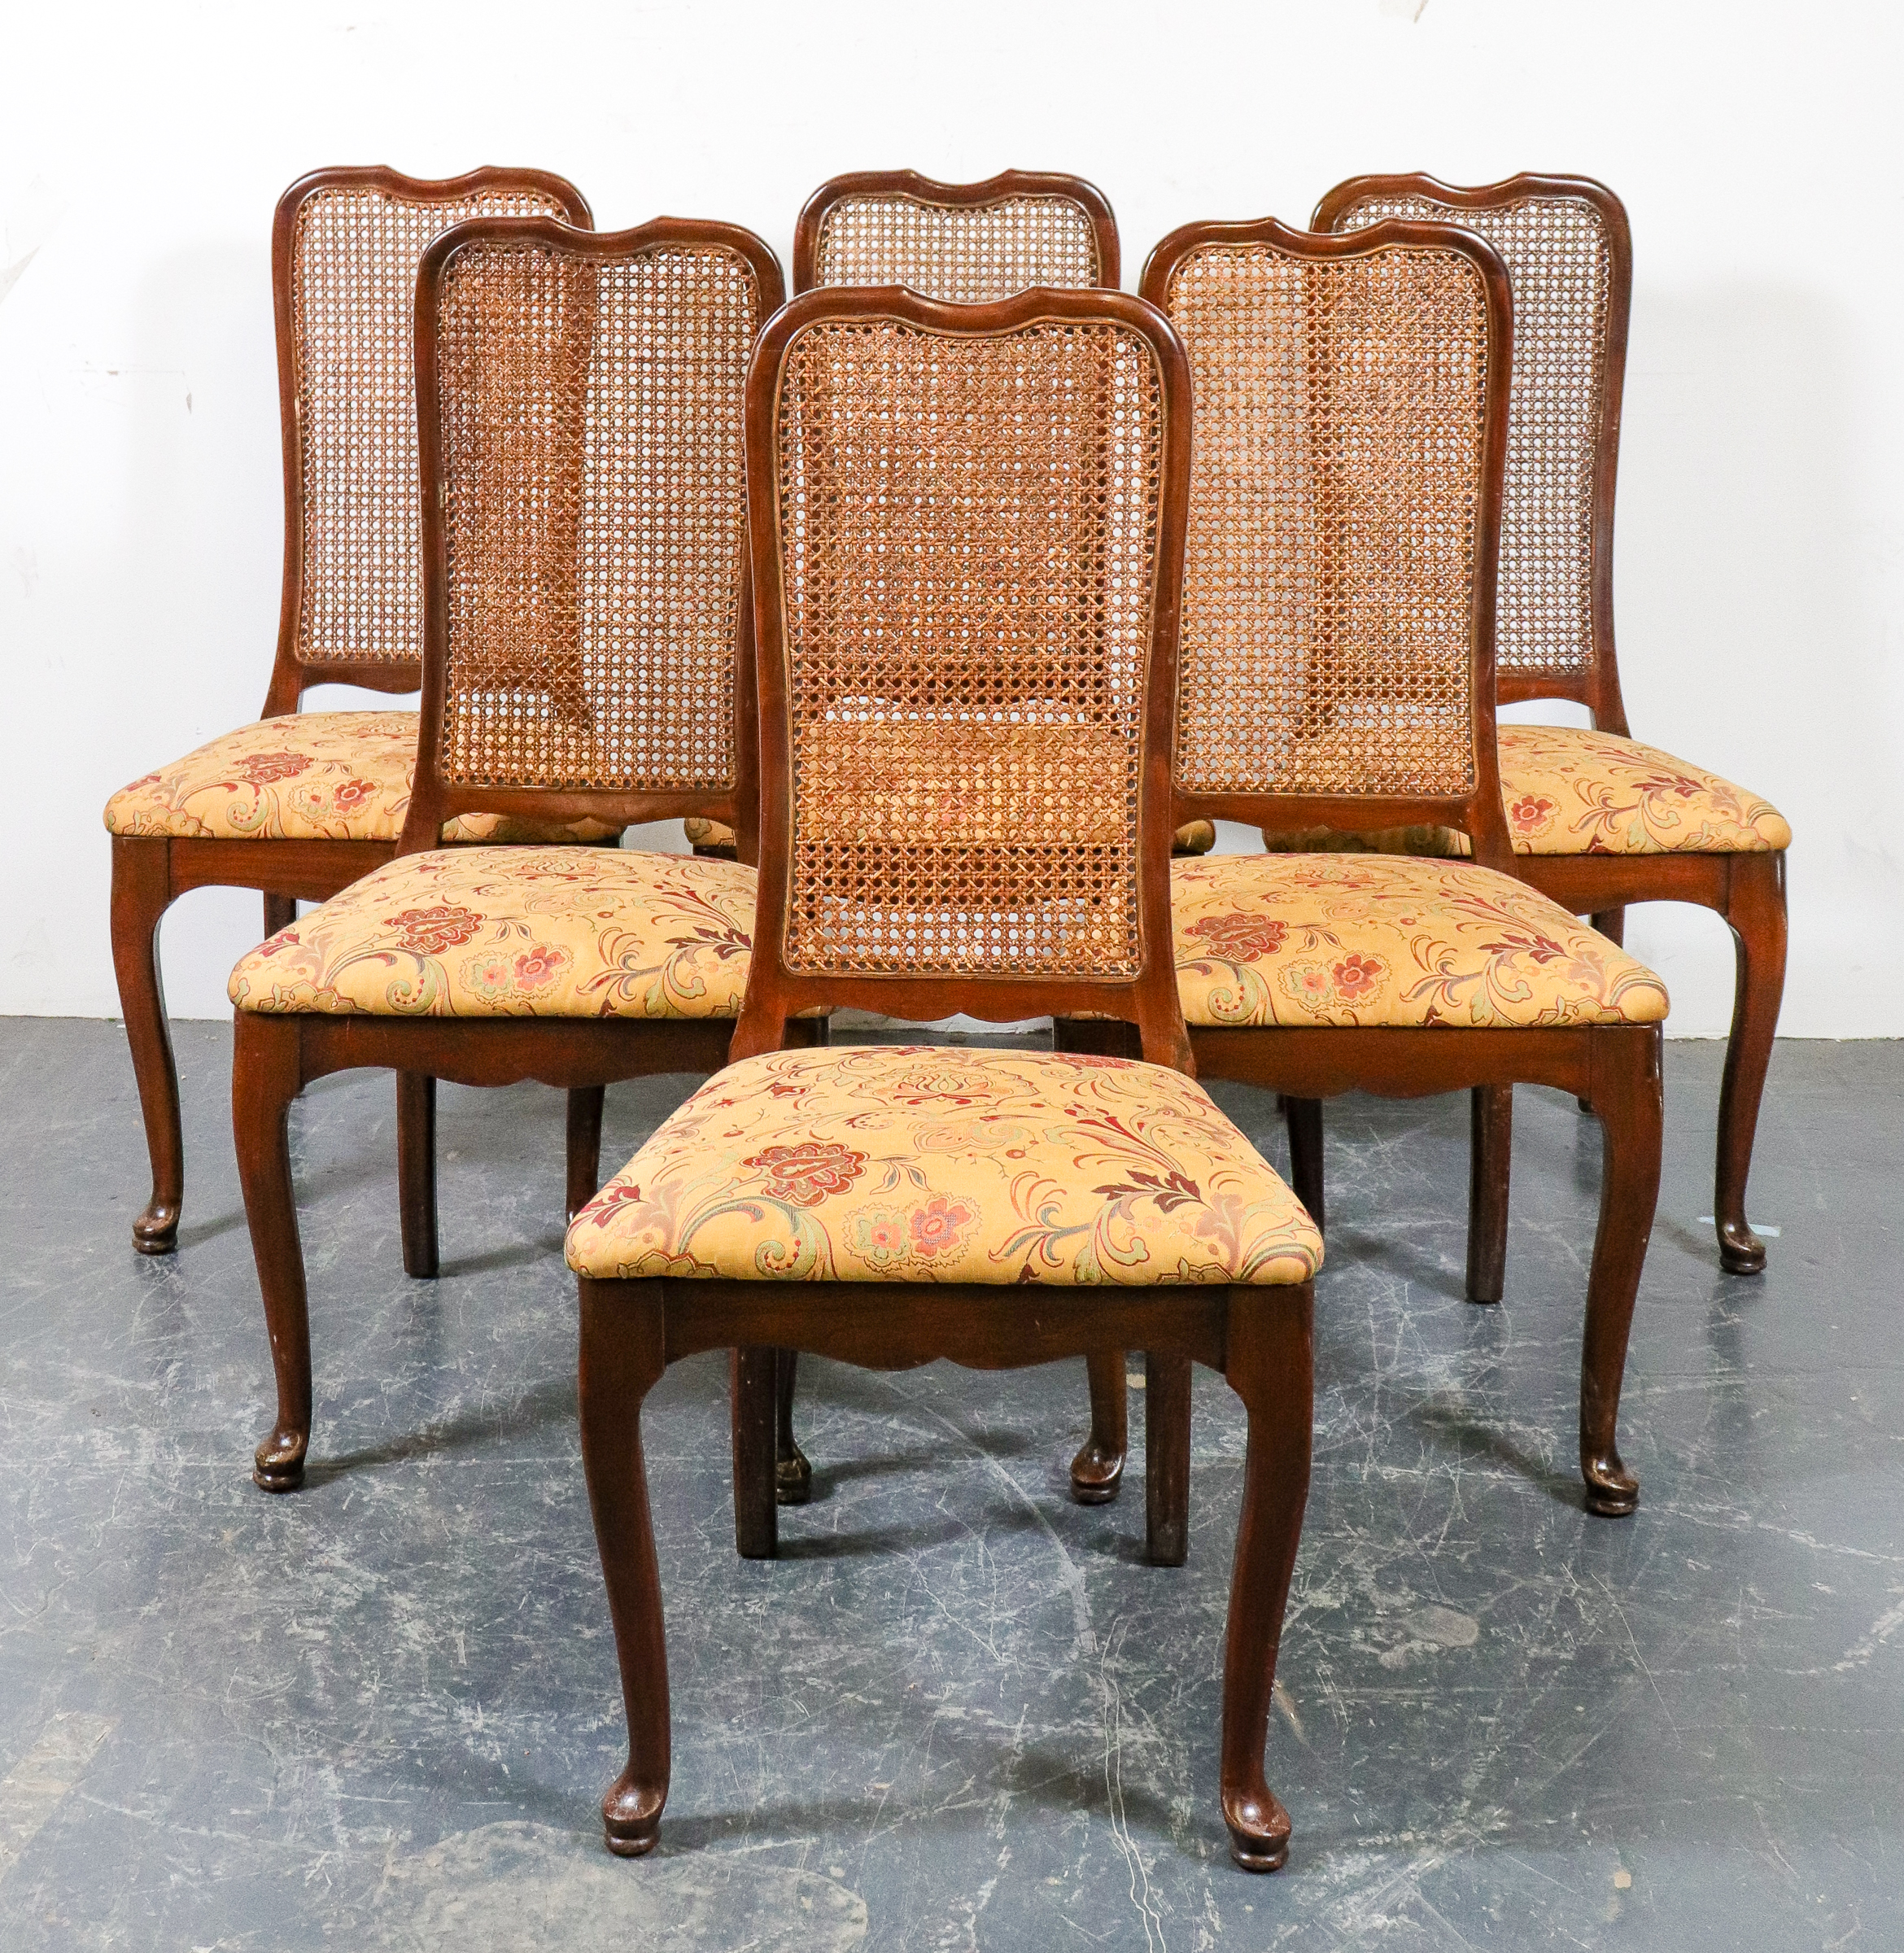 QUEEN ANNE STYLE SIDE DINING CHAIRS  3c3703